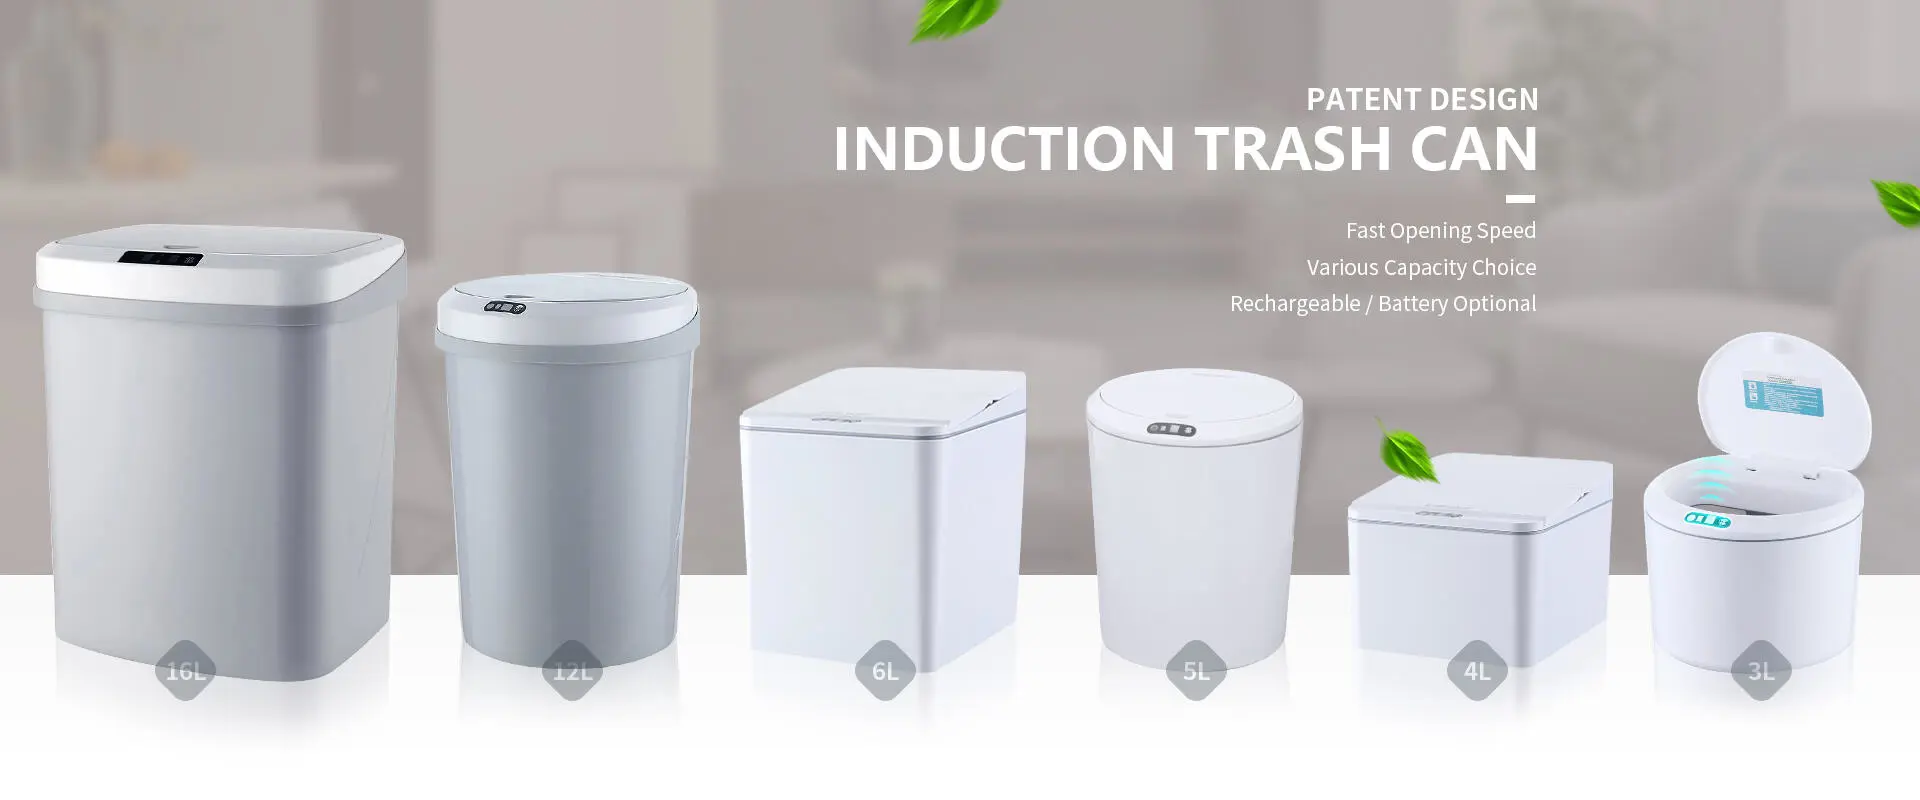 Induction Trash Can